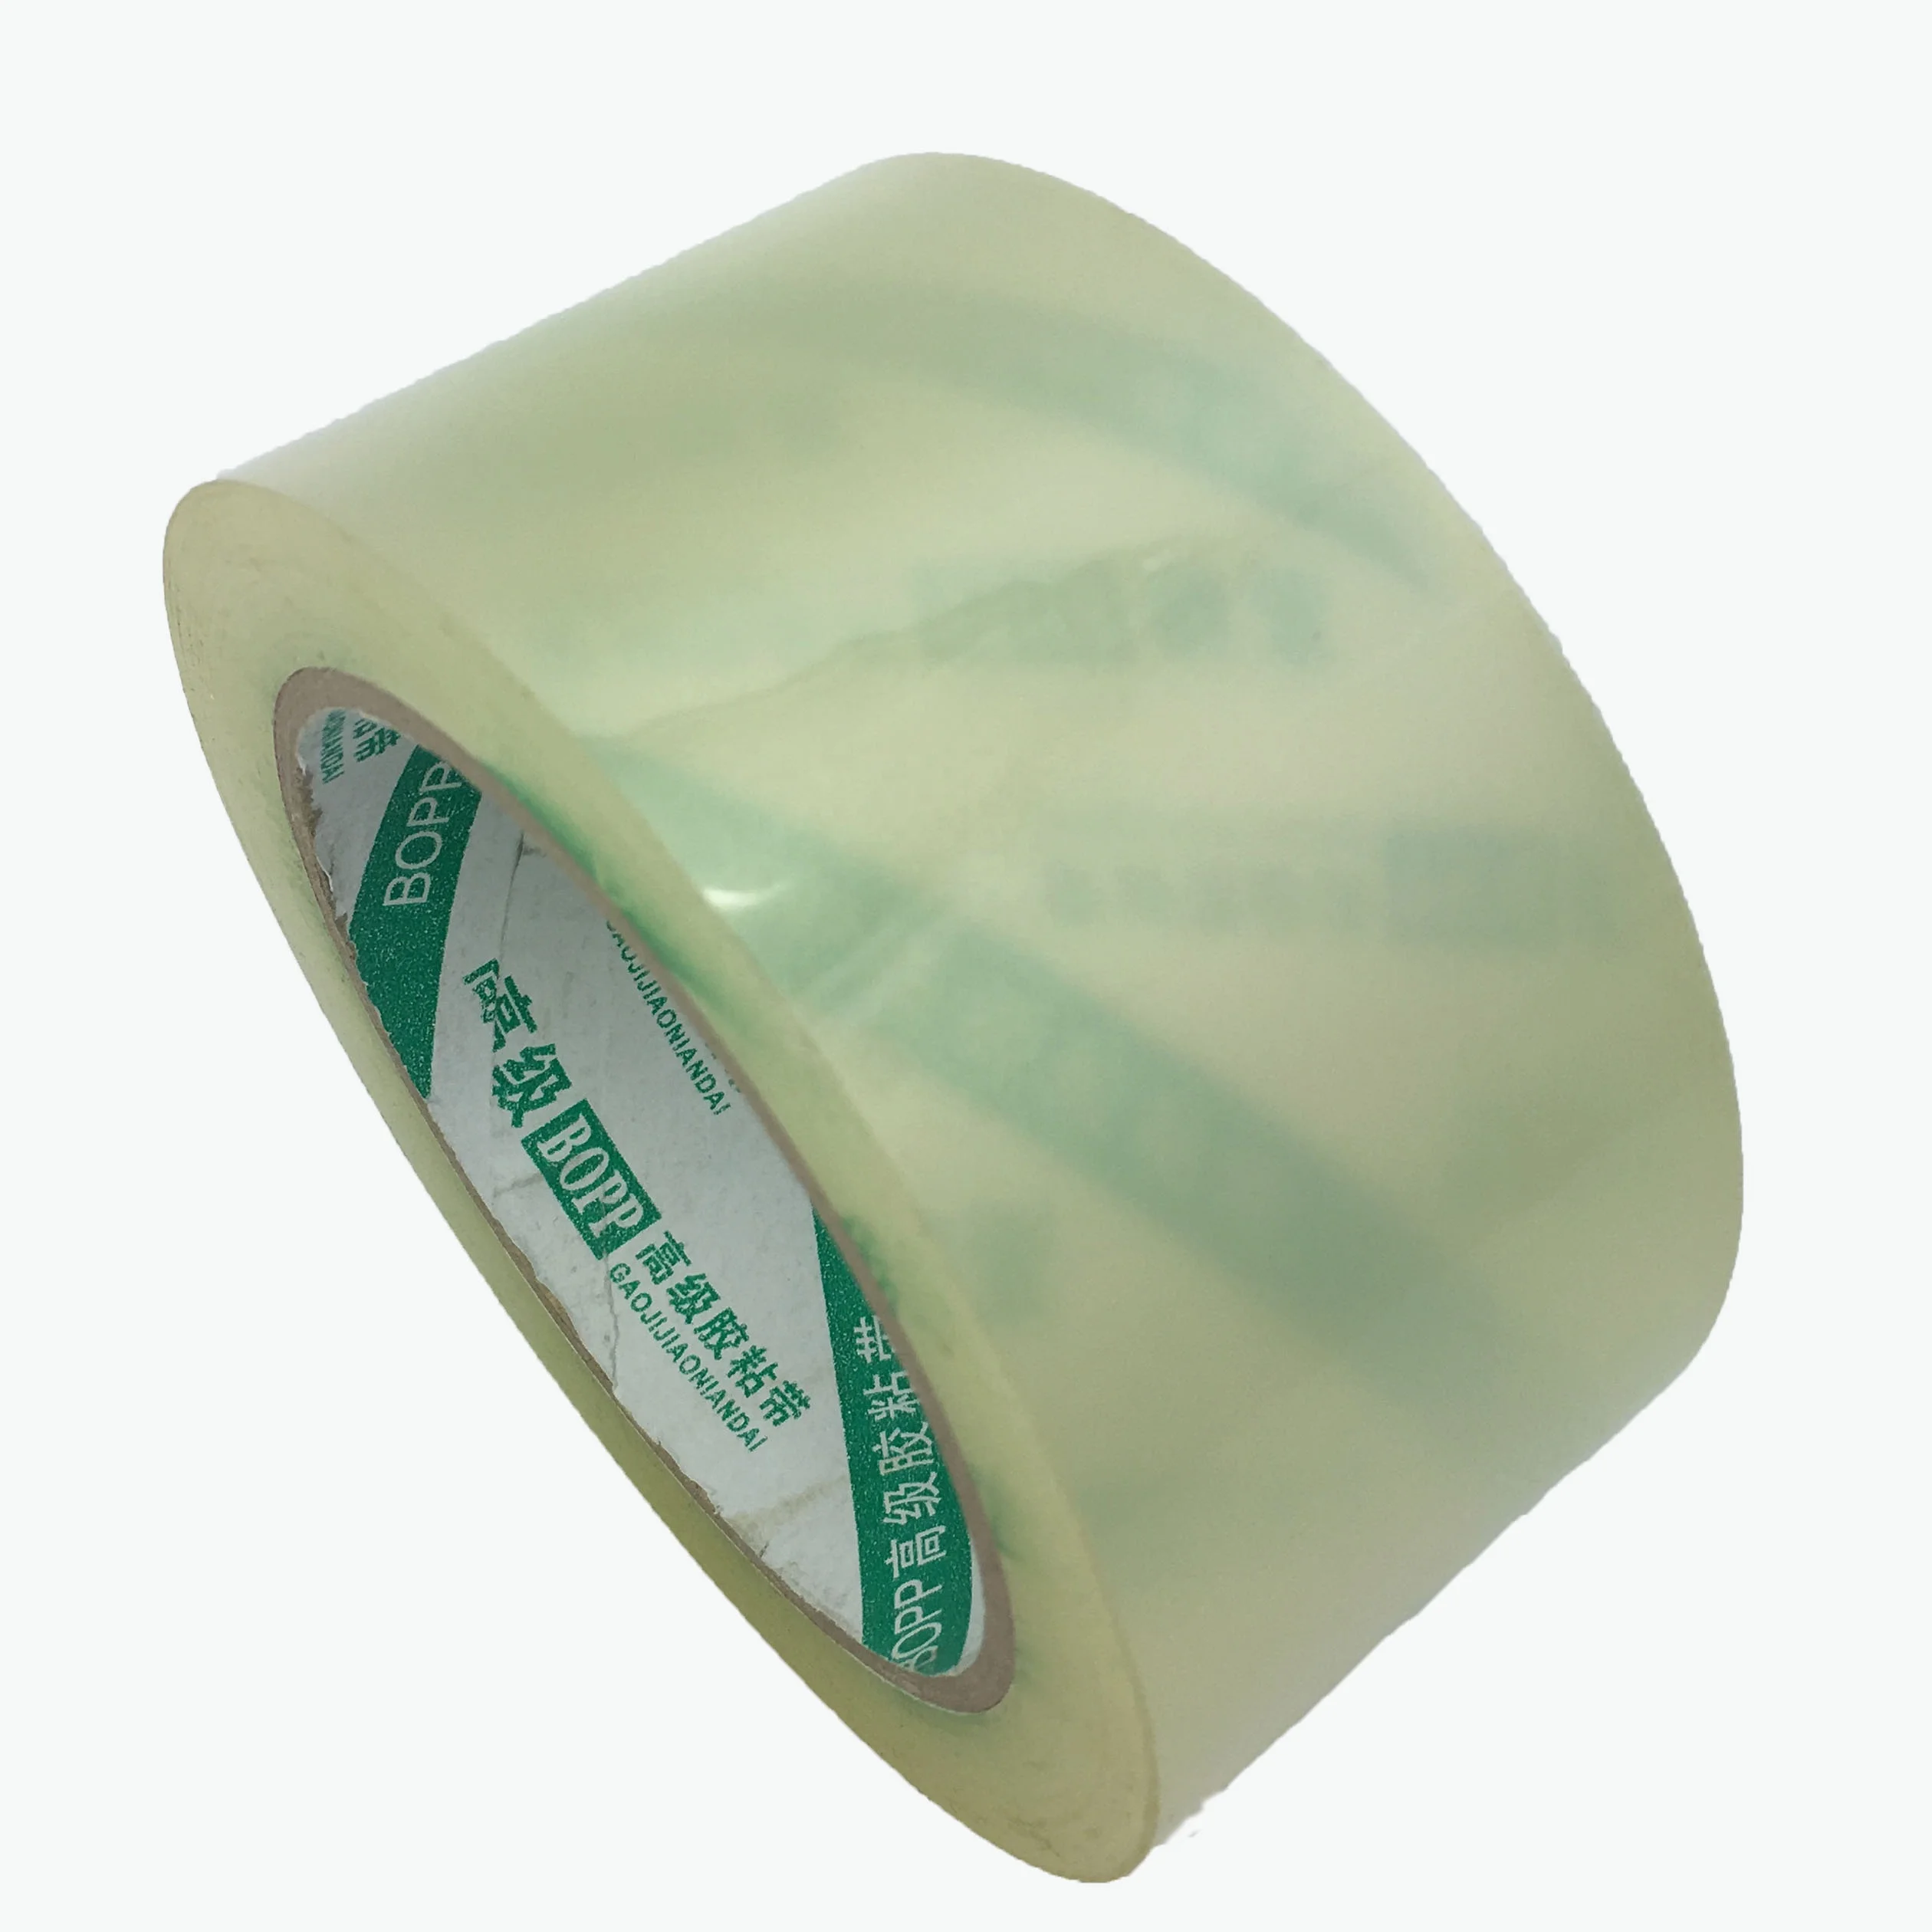 3 ROLLS CLEAR HIGH QUALITY PACKING TAPE SEALING 48MM X 66M SELLOTAP PACKAGING 